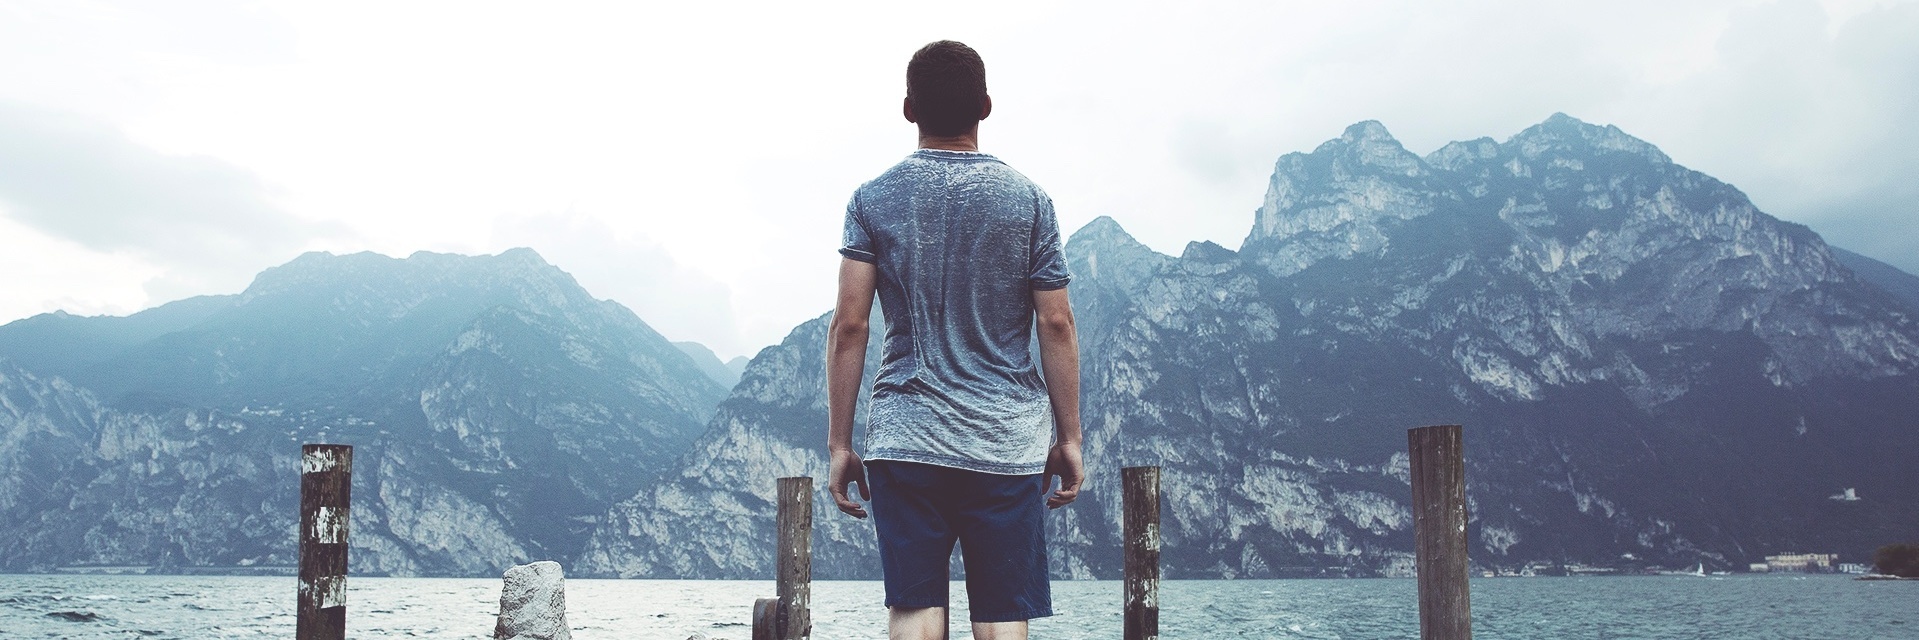 young man standing on pier looking out over water and distant mountains